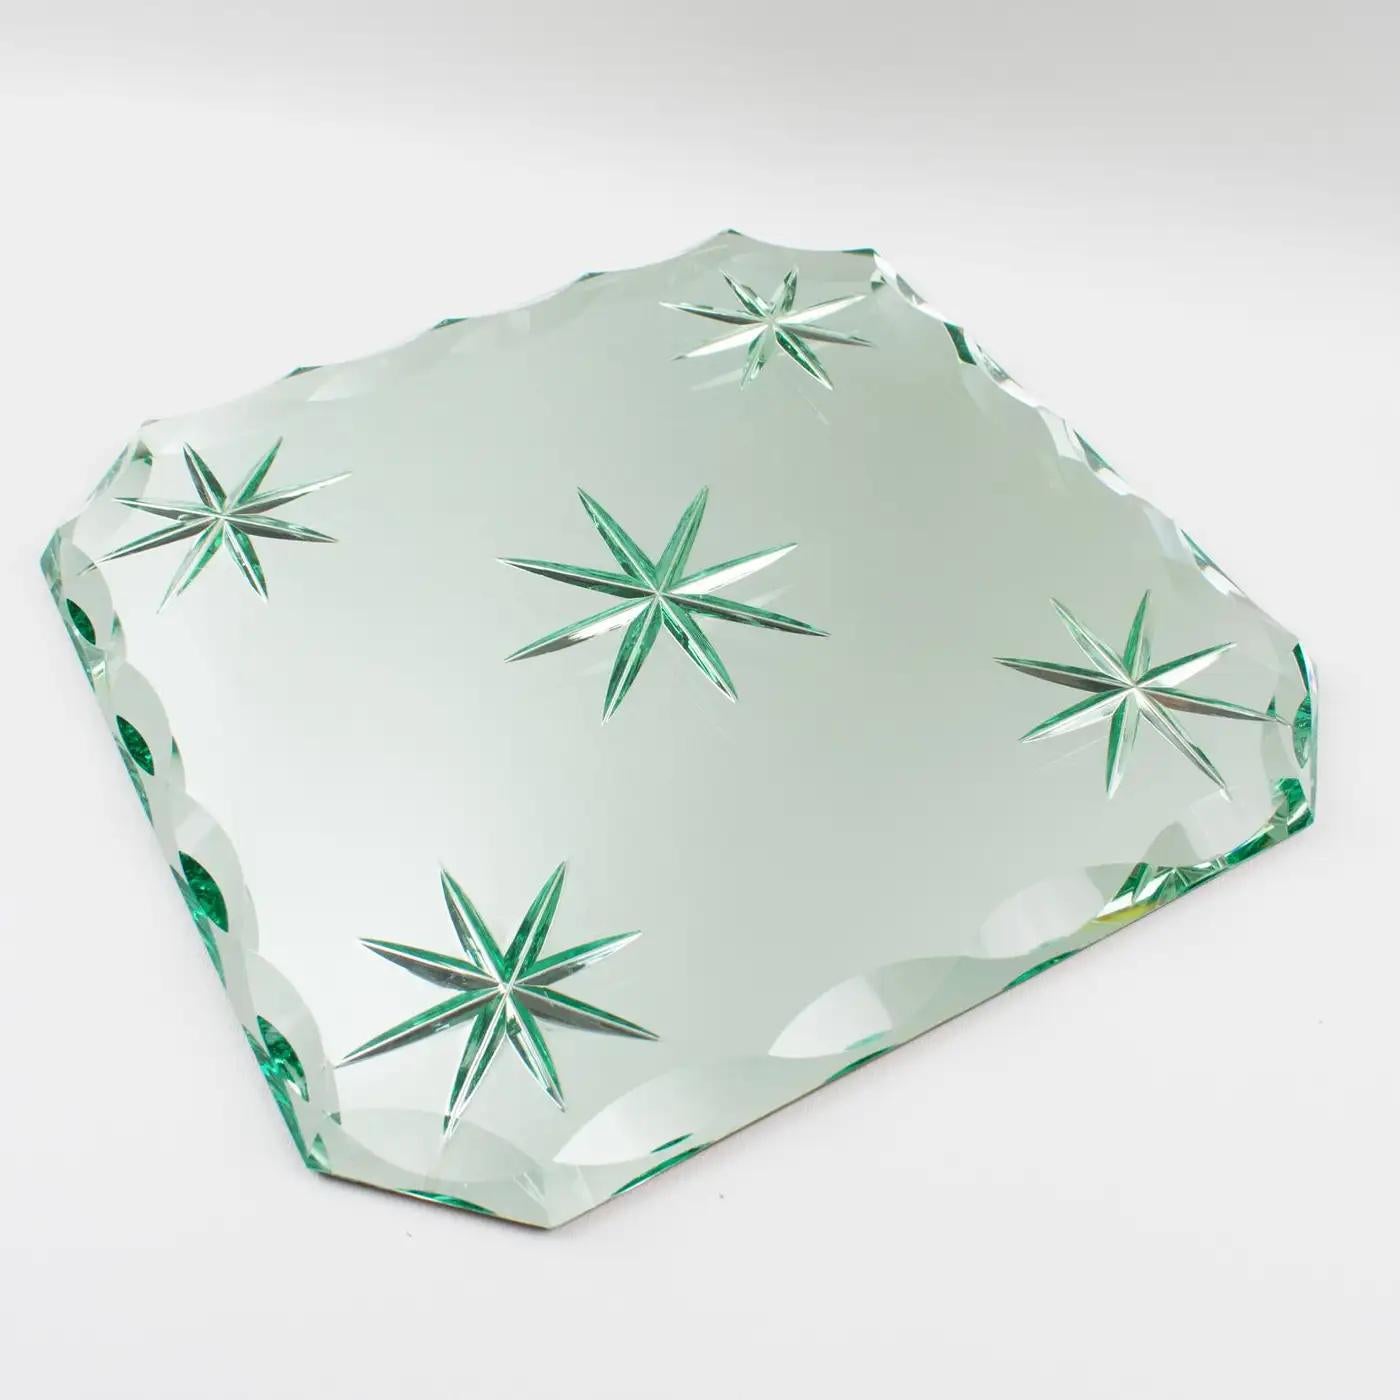 Etched Jean Luce Art Deco Mirrored Glass Tray, Platter or Centerpiece, 1930s For Sale